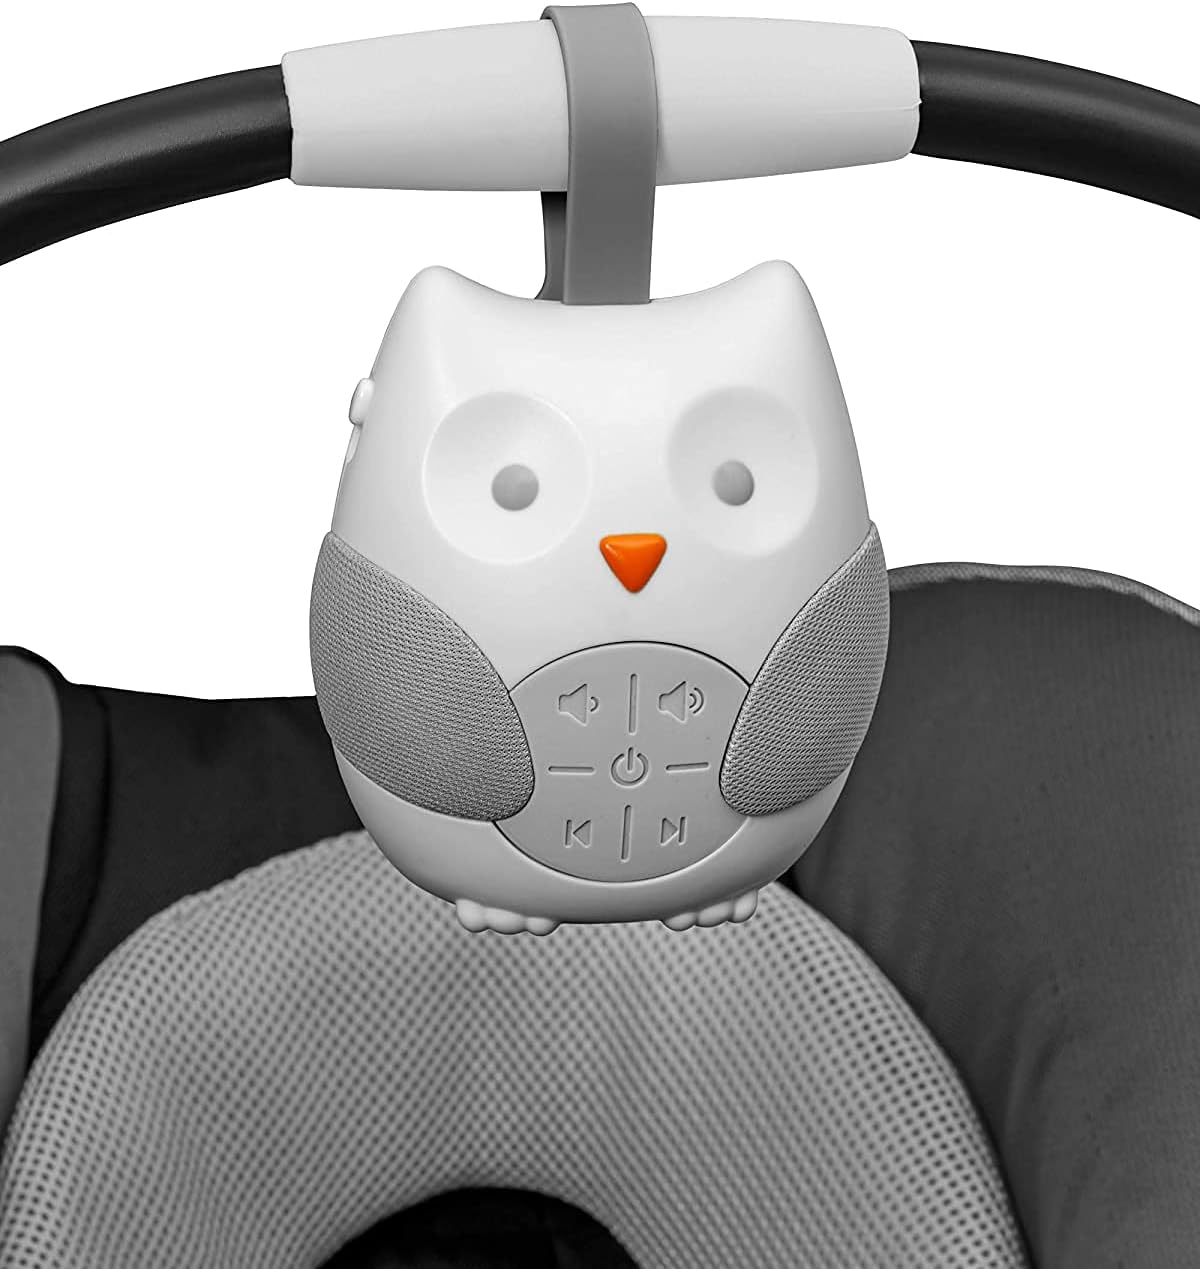 Arabest Baby Sound Machine - Portable White Noise Machine for Baby Sleeping,Moonlight & Melodies Nightlight Soother,Owl